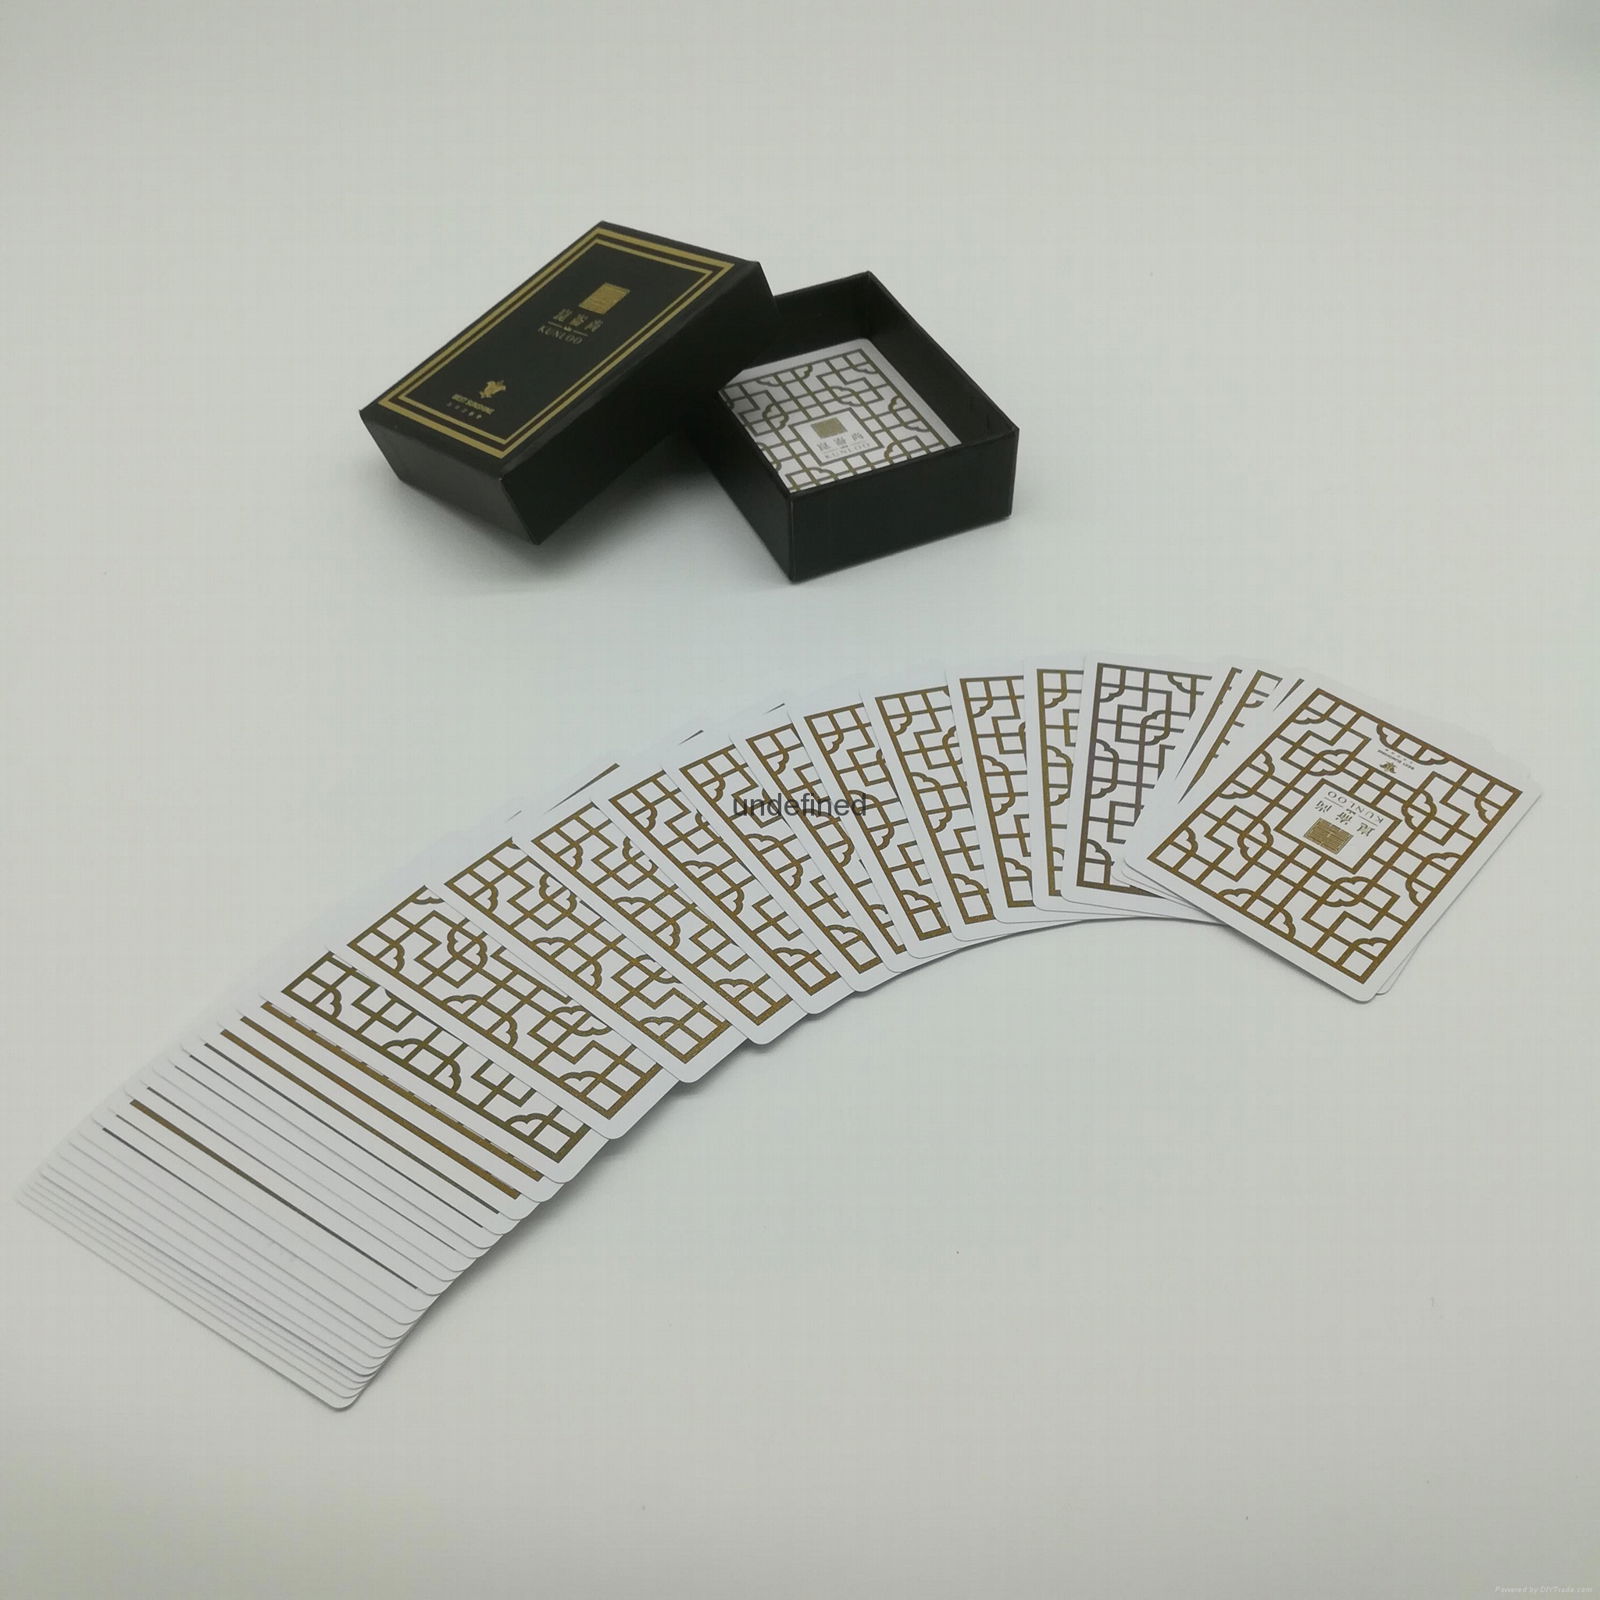 0.3mm Thickness Plastic Deck Of Playing Cards Online China Suppliers manufacture 4